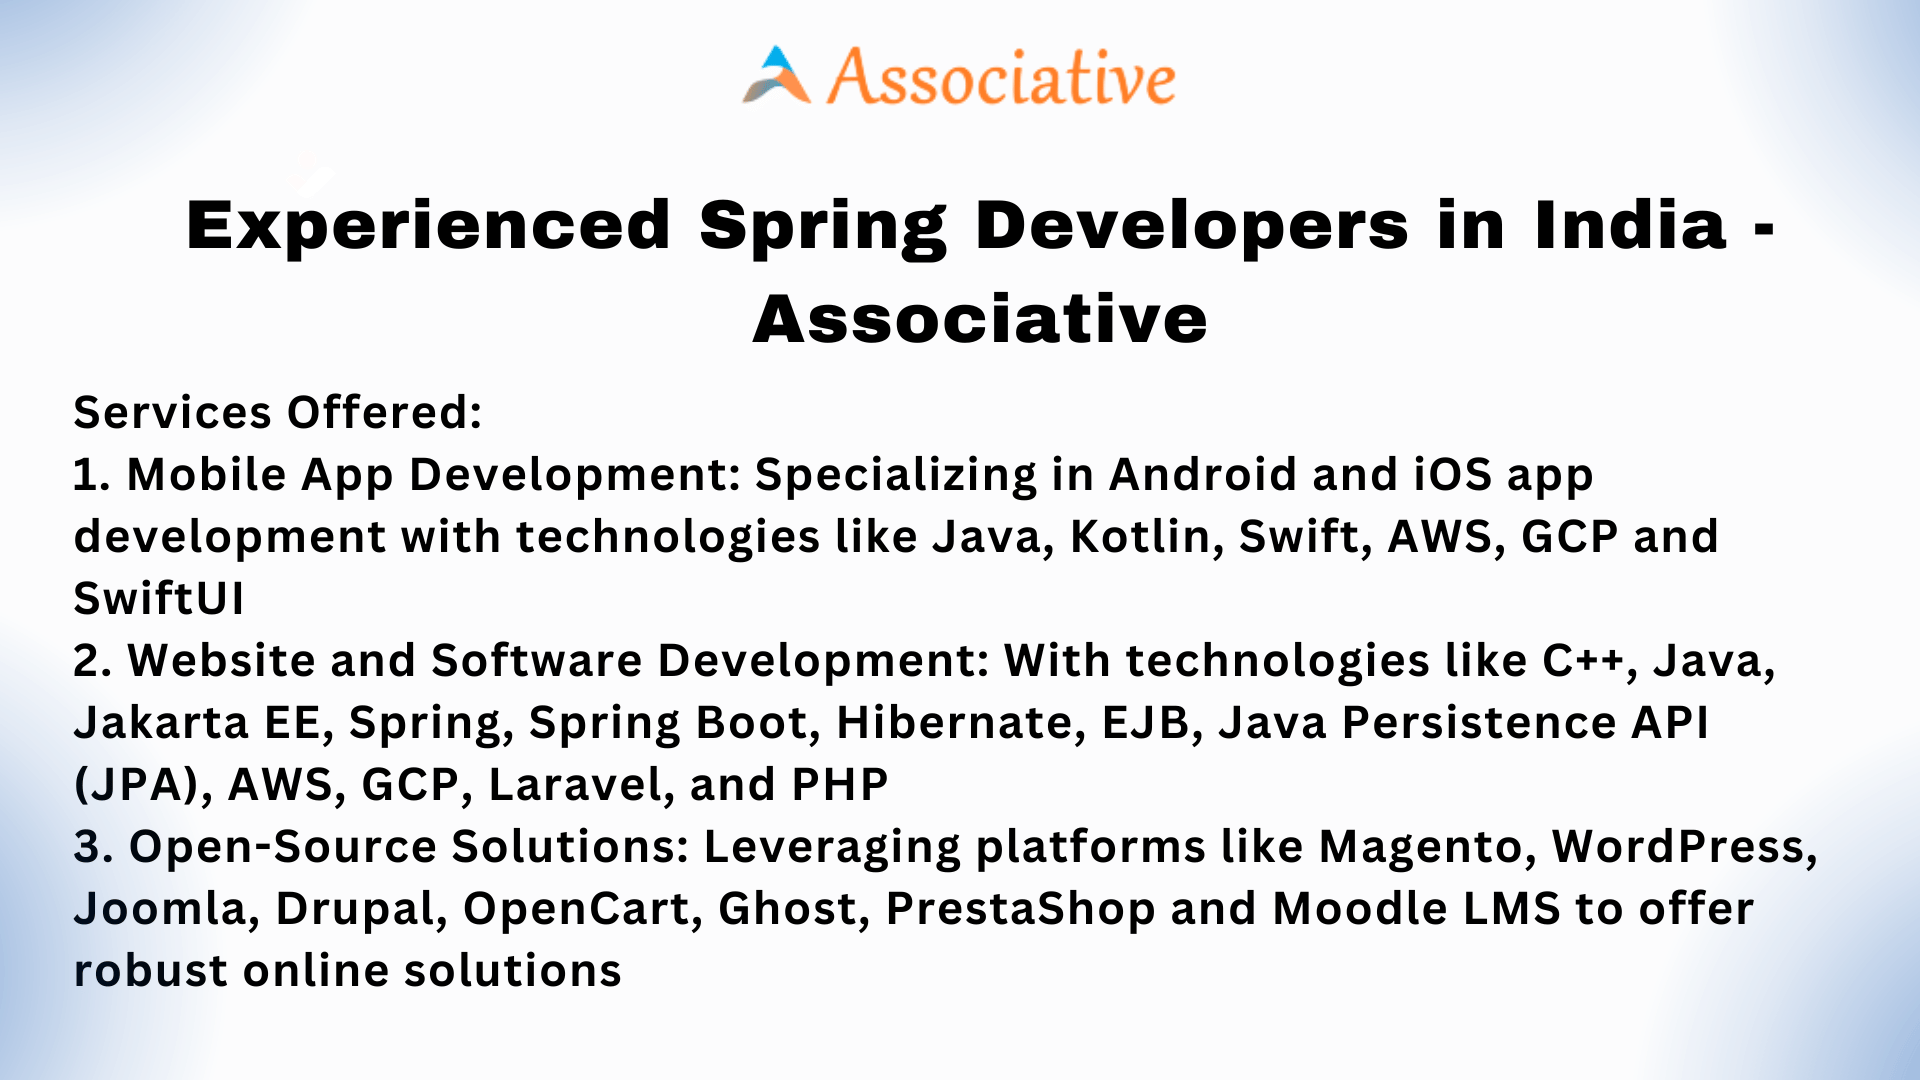 Experienced Spring Developers in India - Associative